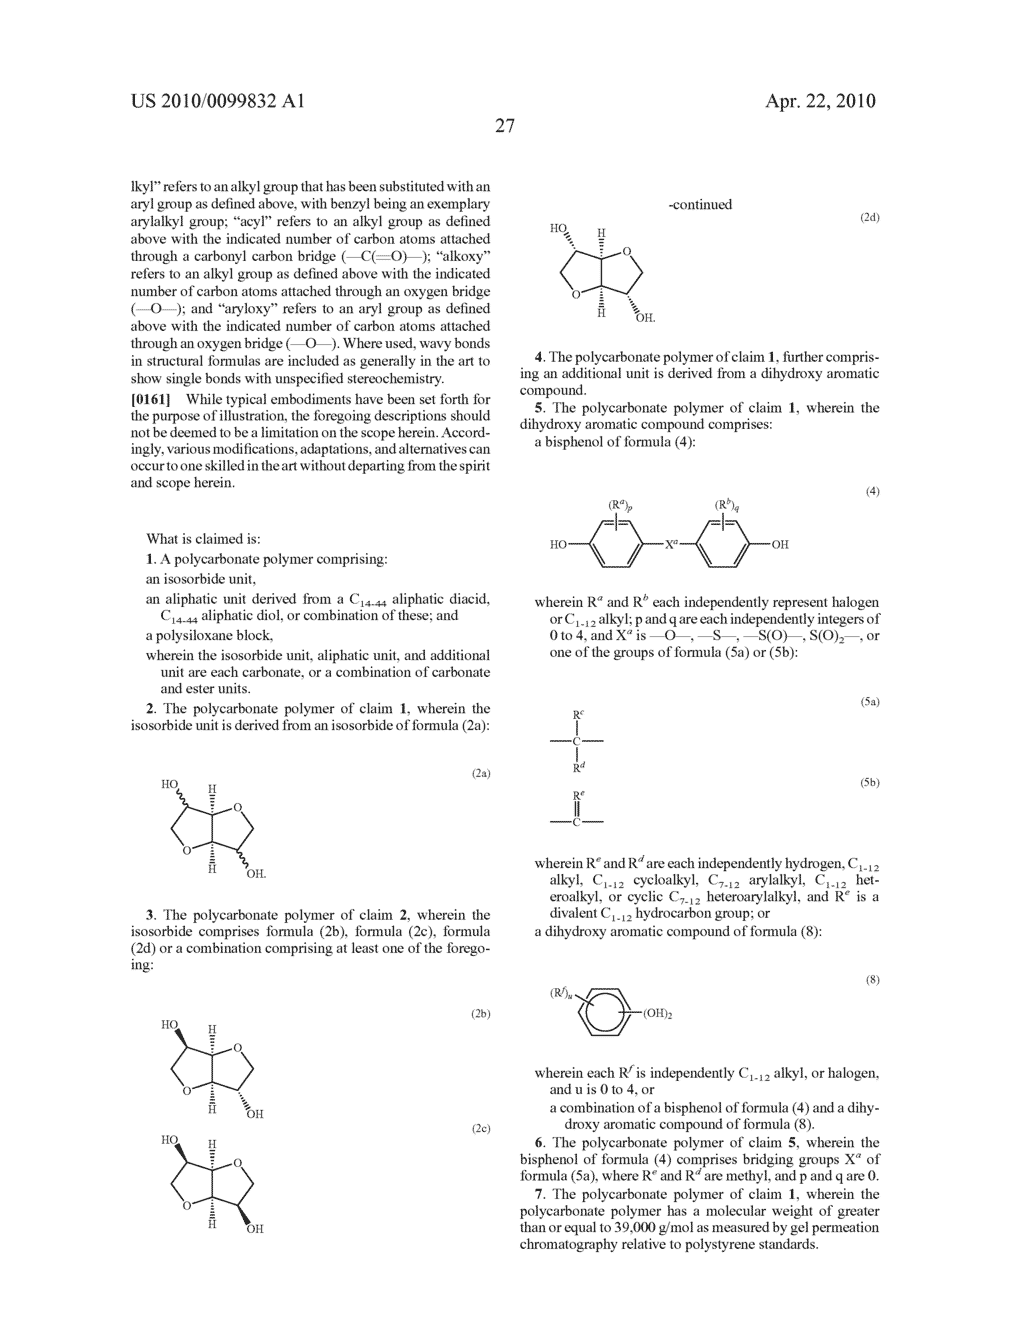 ISOSORBIDE-BASED POLYCARBONATES, METHOD OF MAKING, AND ARTICLES FORMED THEREFROM - diagram, schematic, and image 29